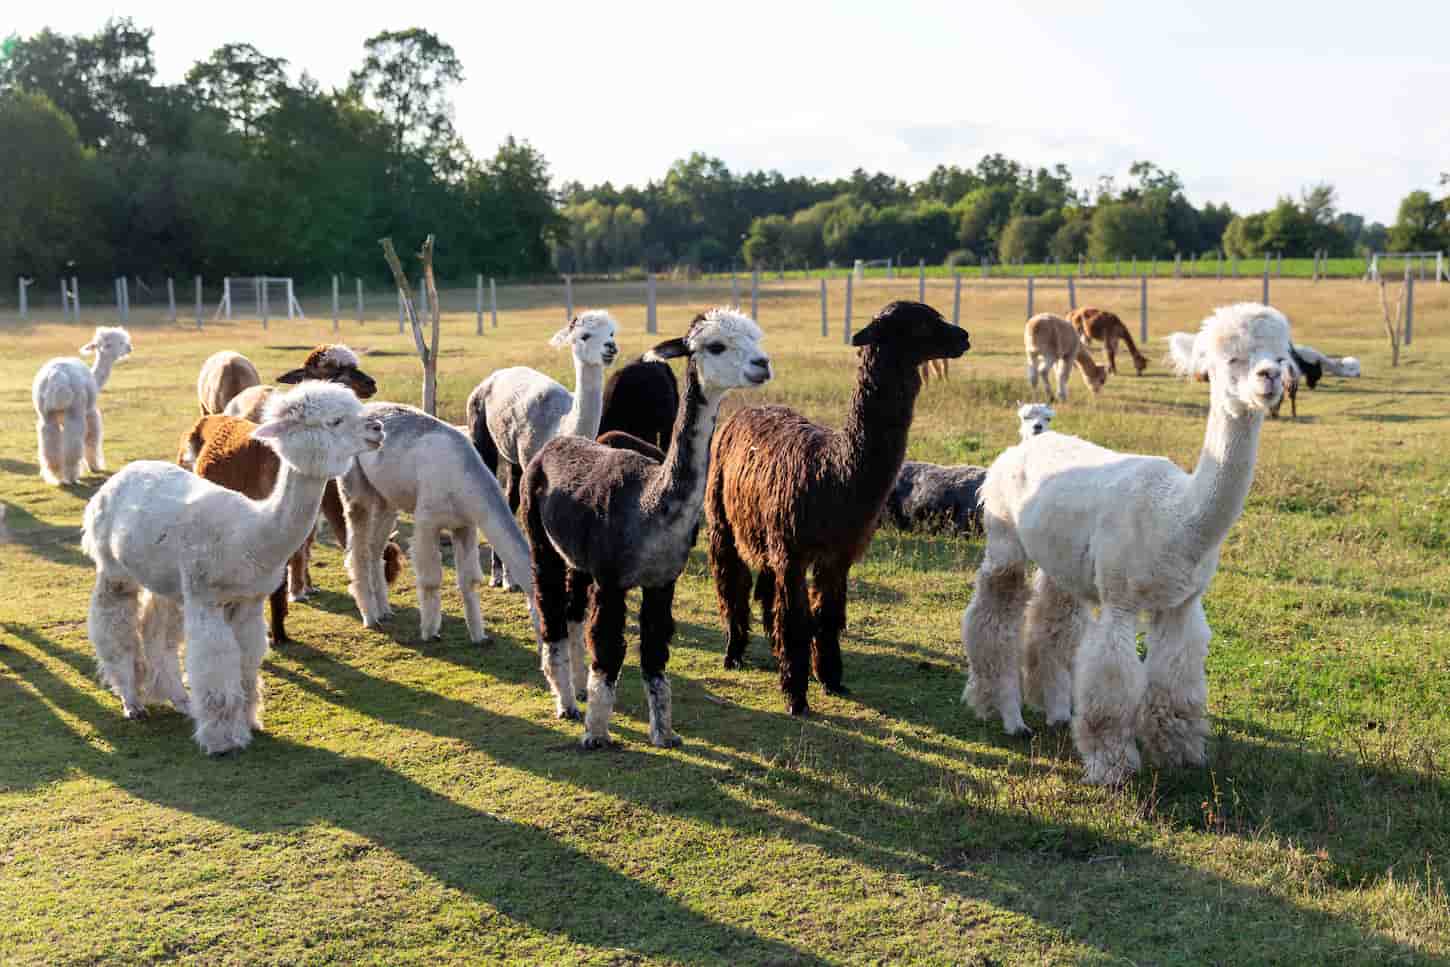 An image of a group of alpacas on a farm standing next on each other.